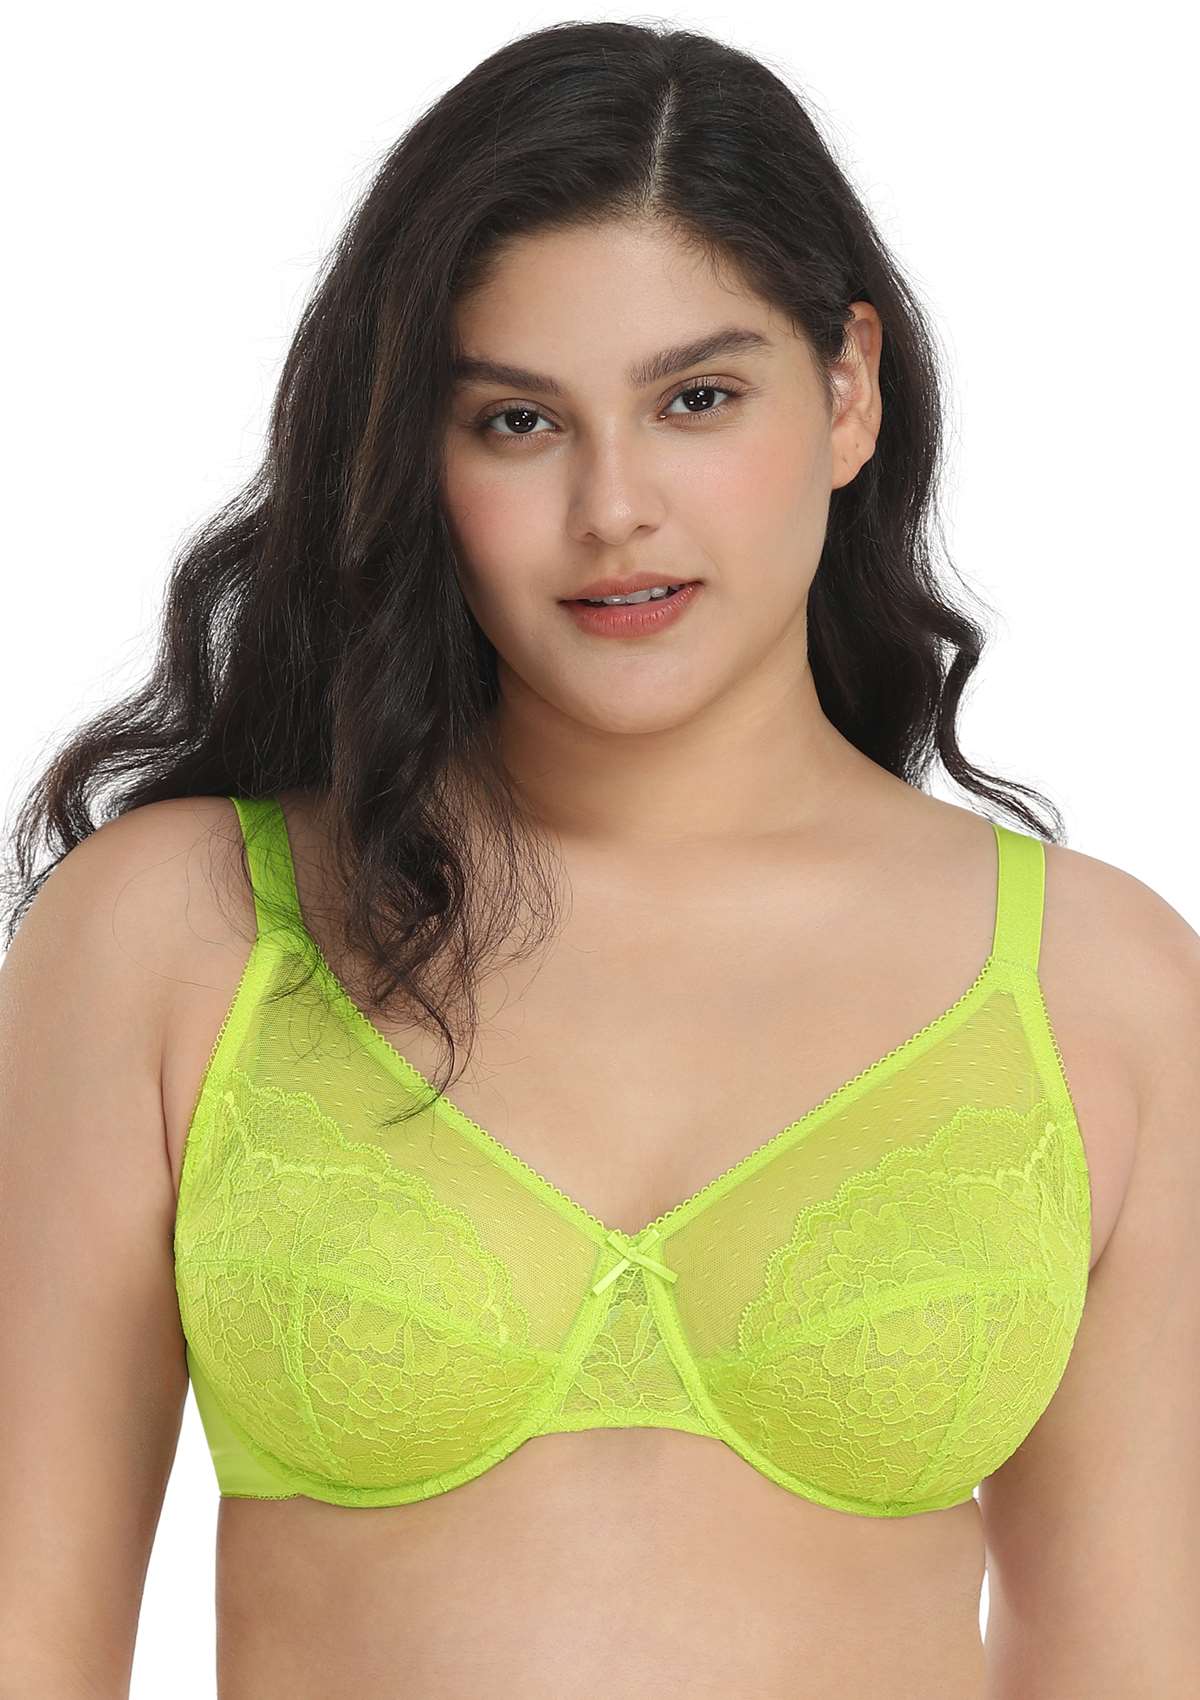 HSIA Enchante Full Cup Minimizing Bra: Supportive Unlined Lace Bra - Lime Green / 40 / G